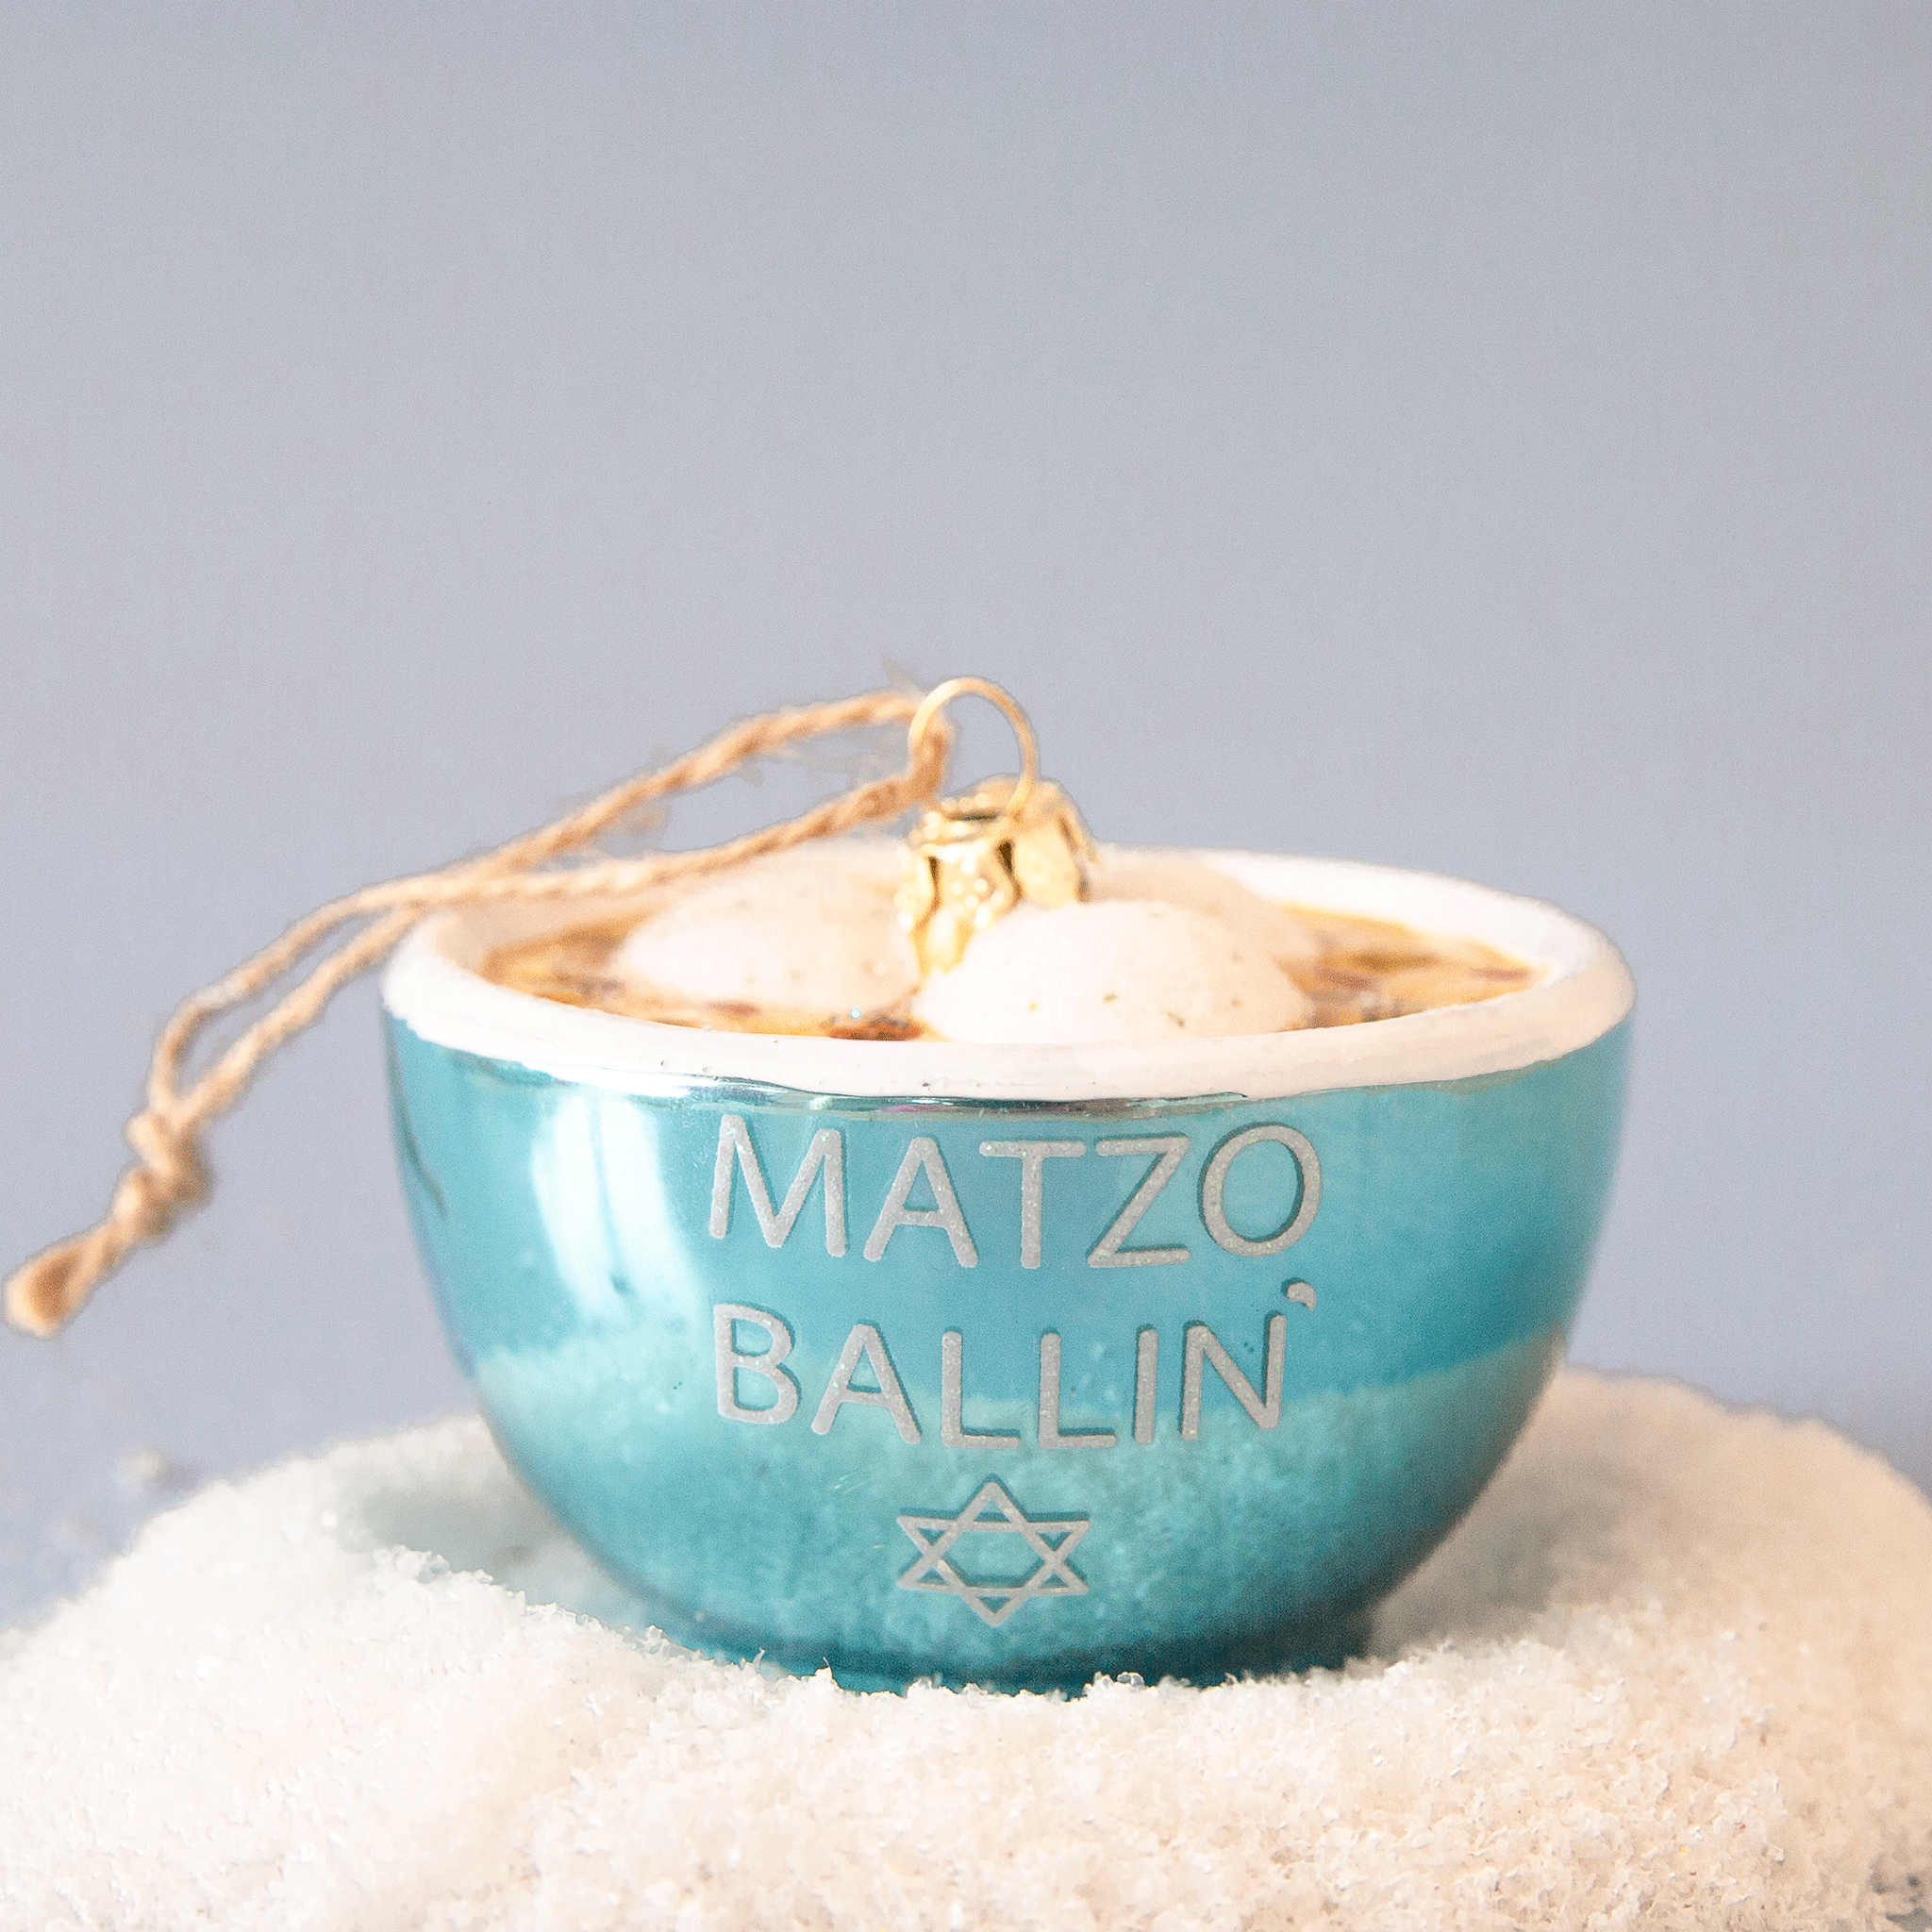 A glass matzo ball soup ornament with dumplings and a blue bowl that says "matzo ballin" in white text.